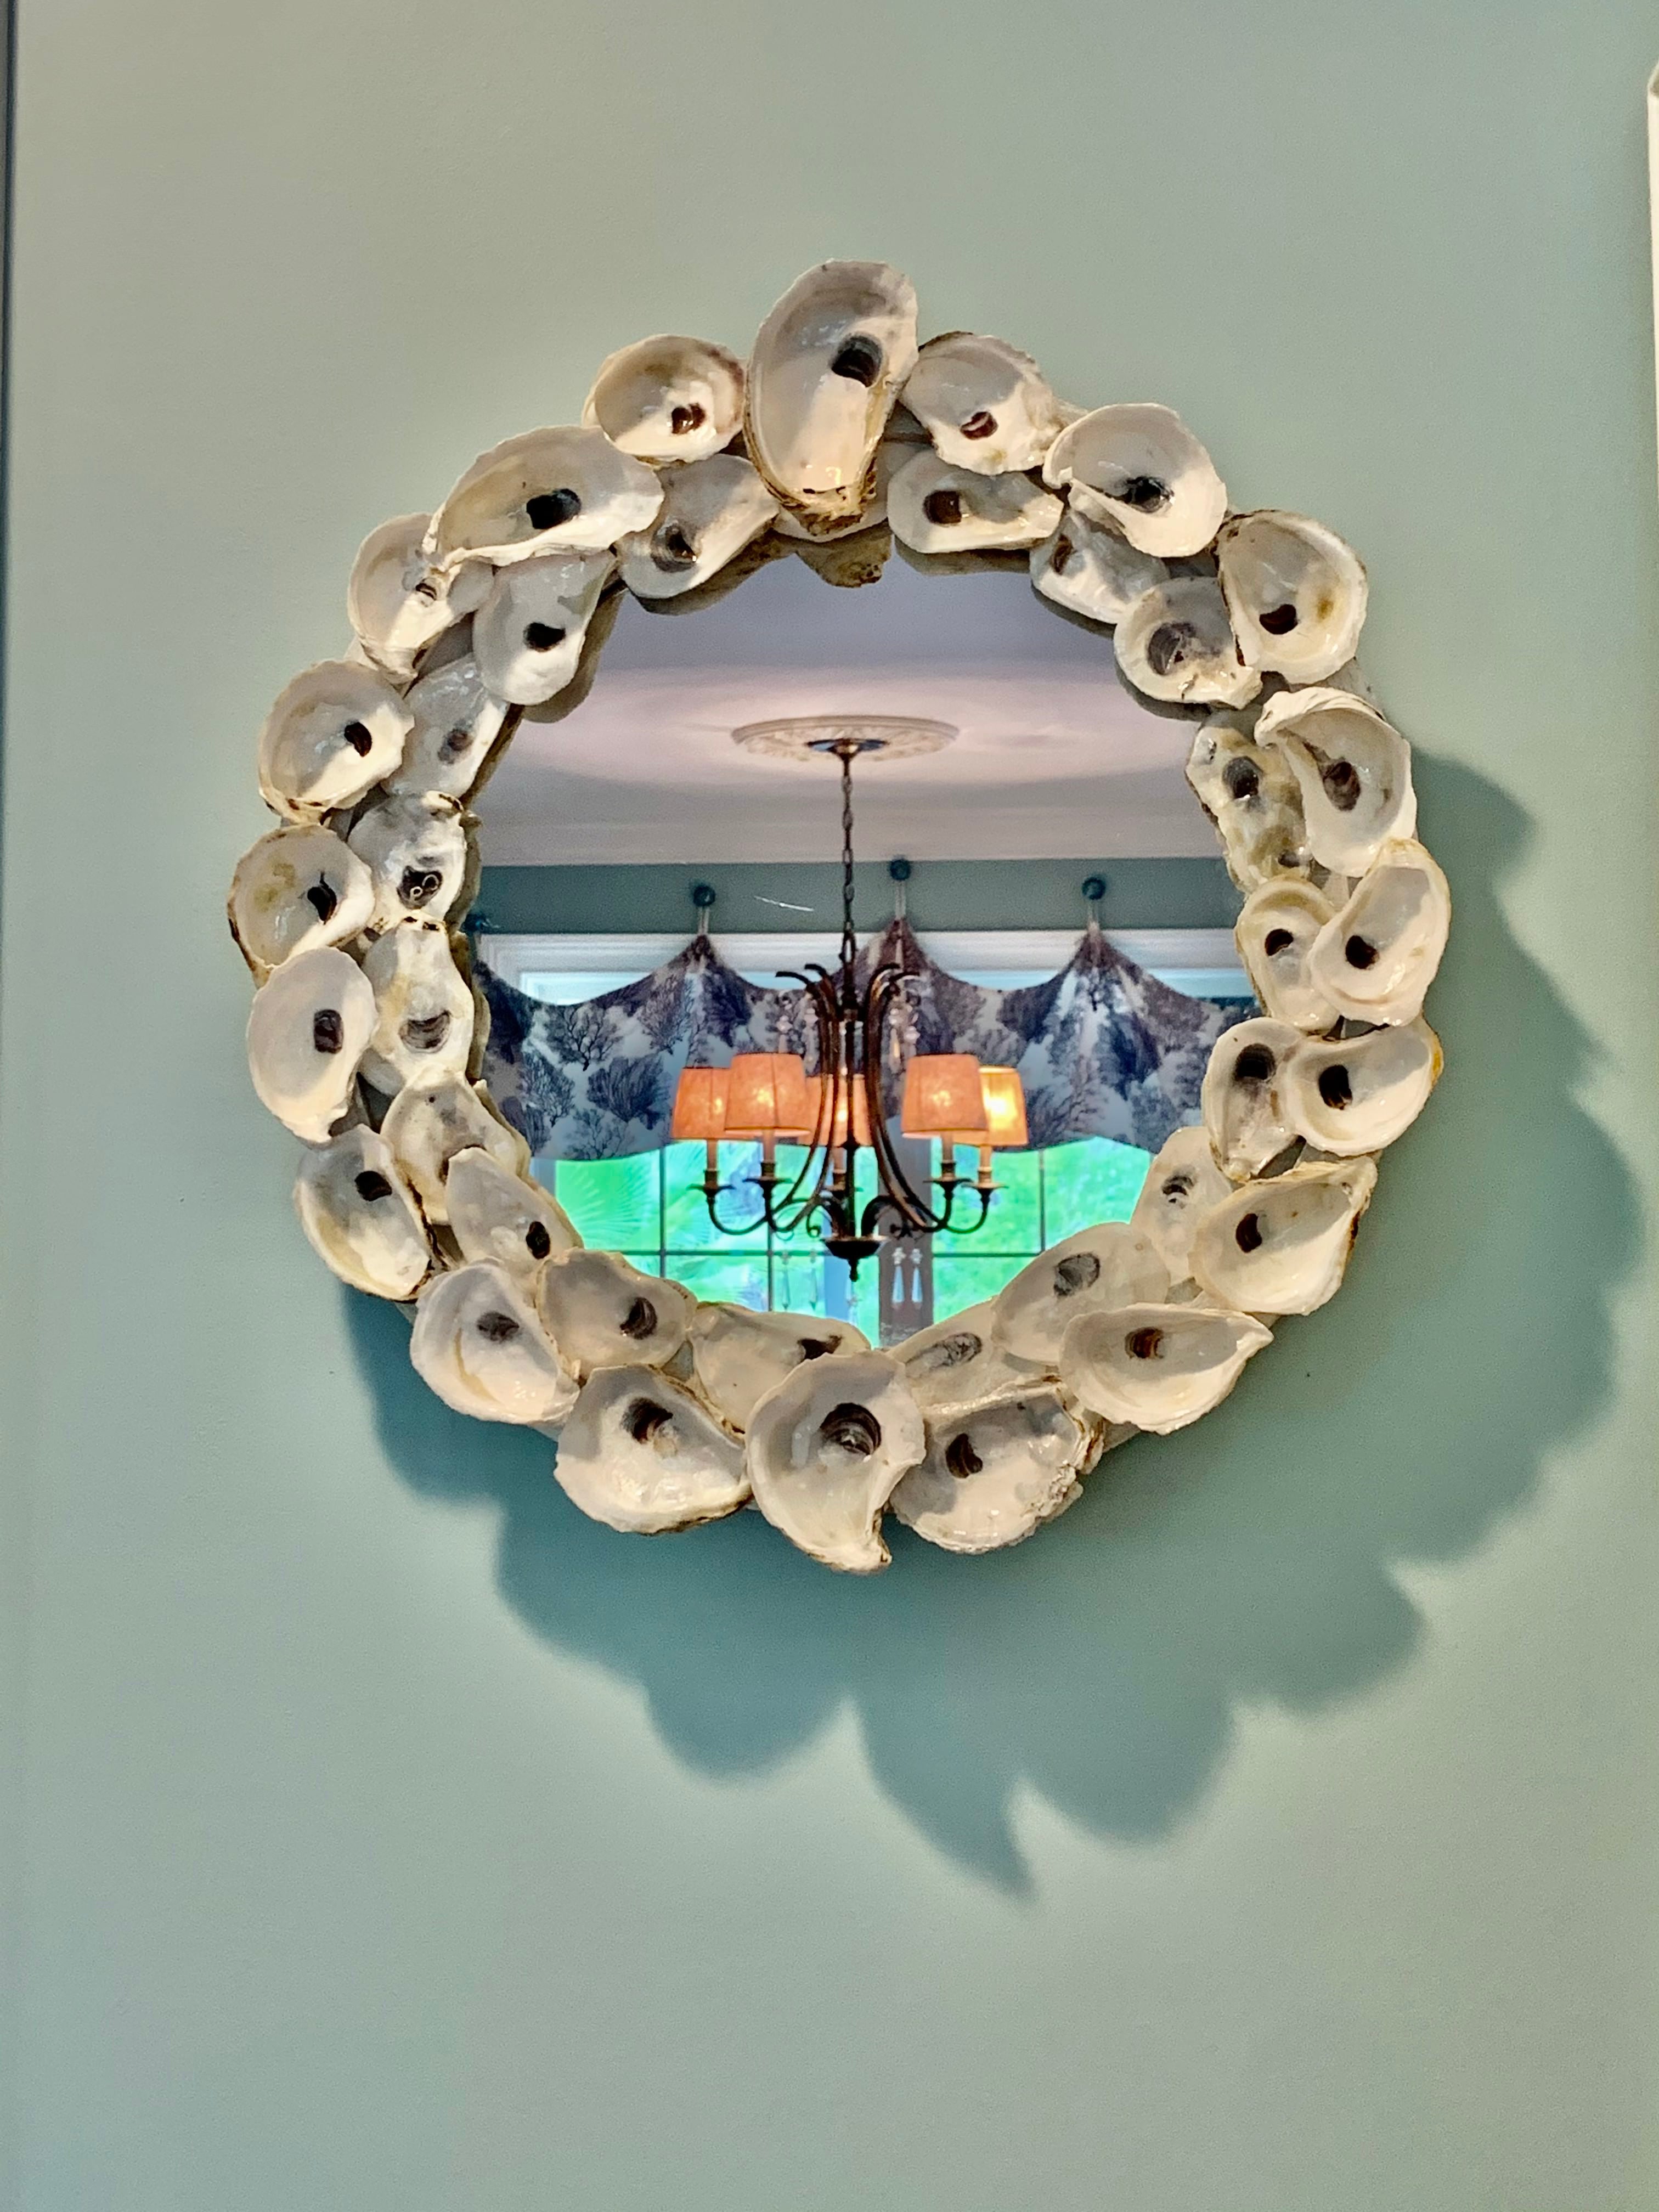 How To Make A Beautiful Oyster Shell Mirror